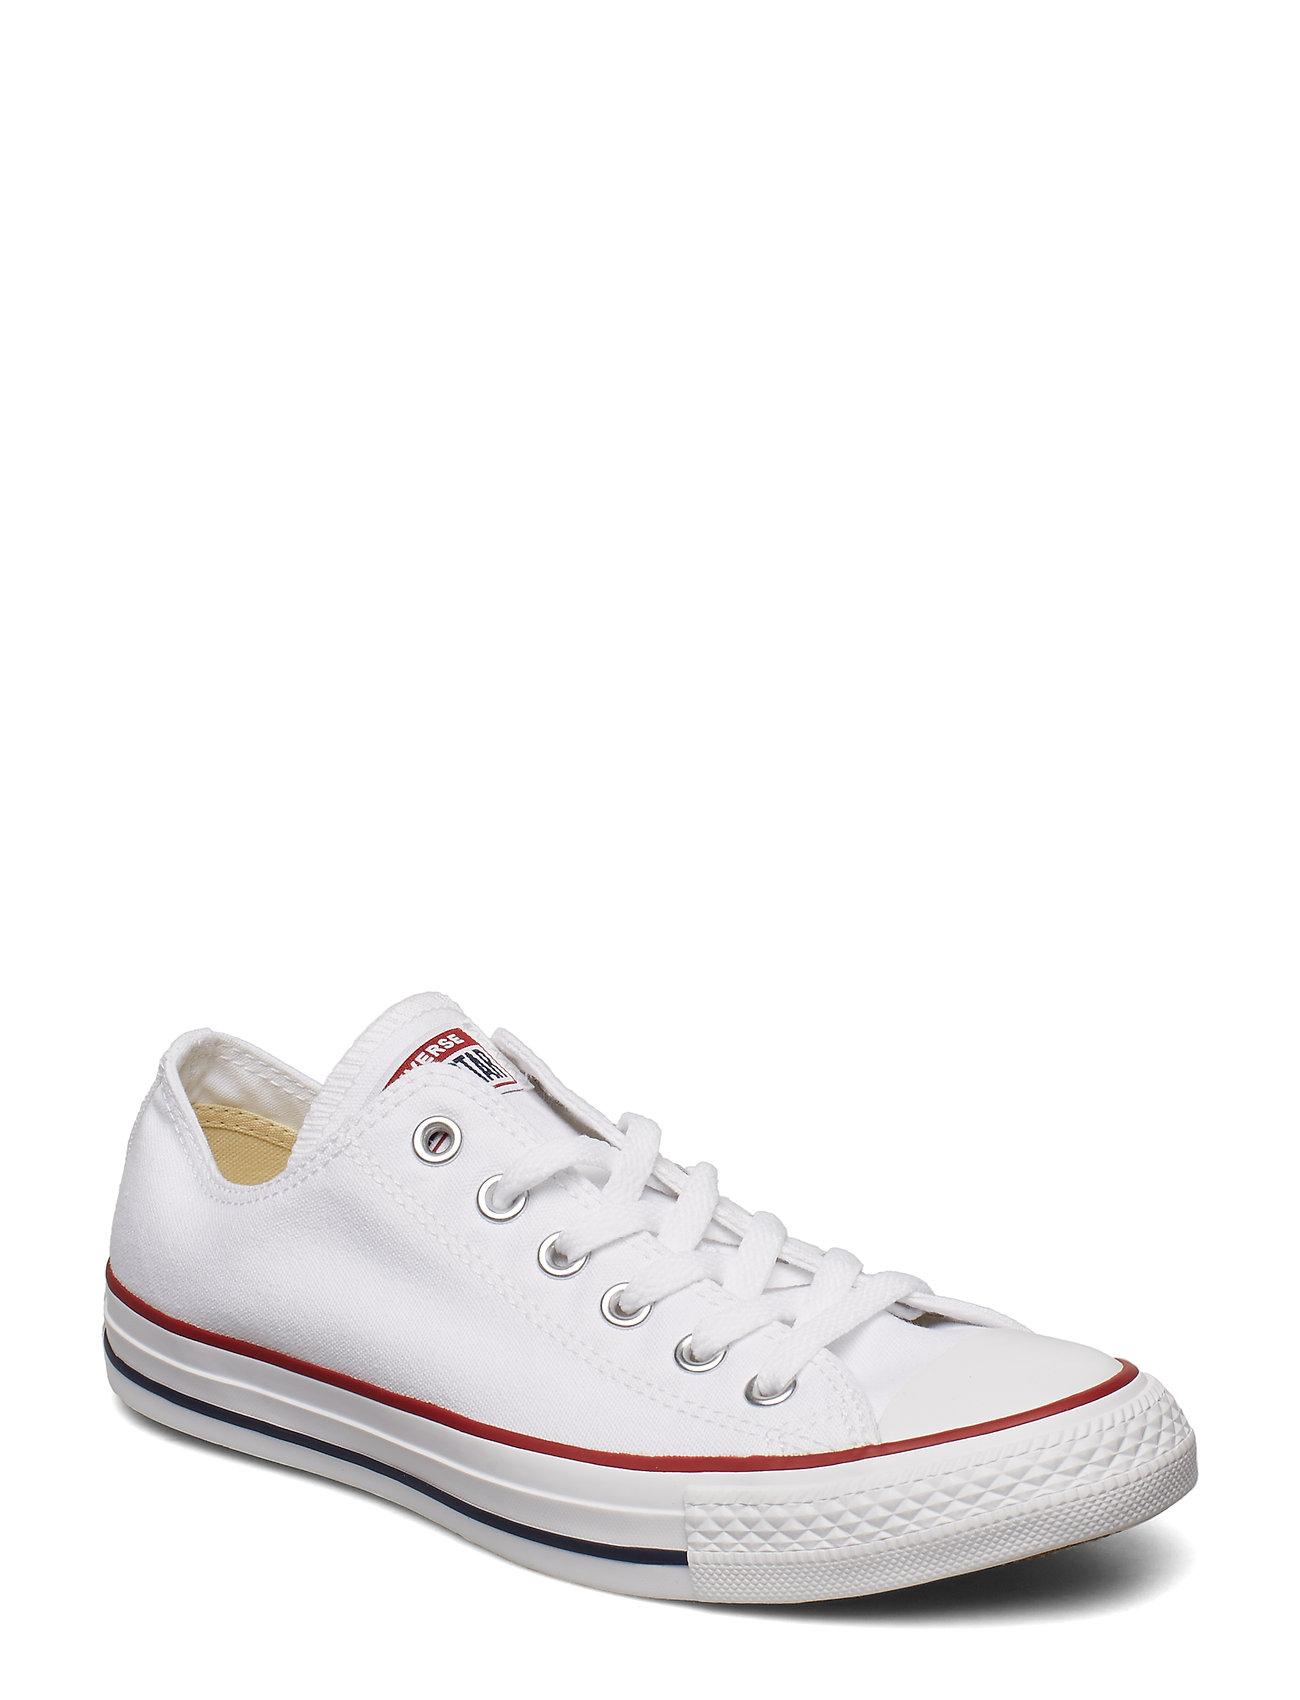 Converse "Chuck Taylor All Star Low-top Sneakers White Converse"